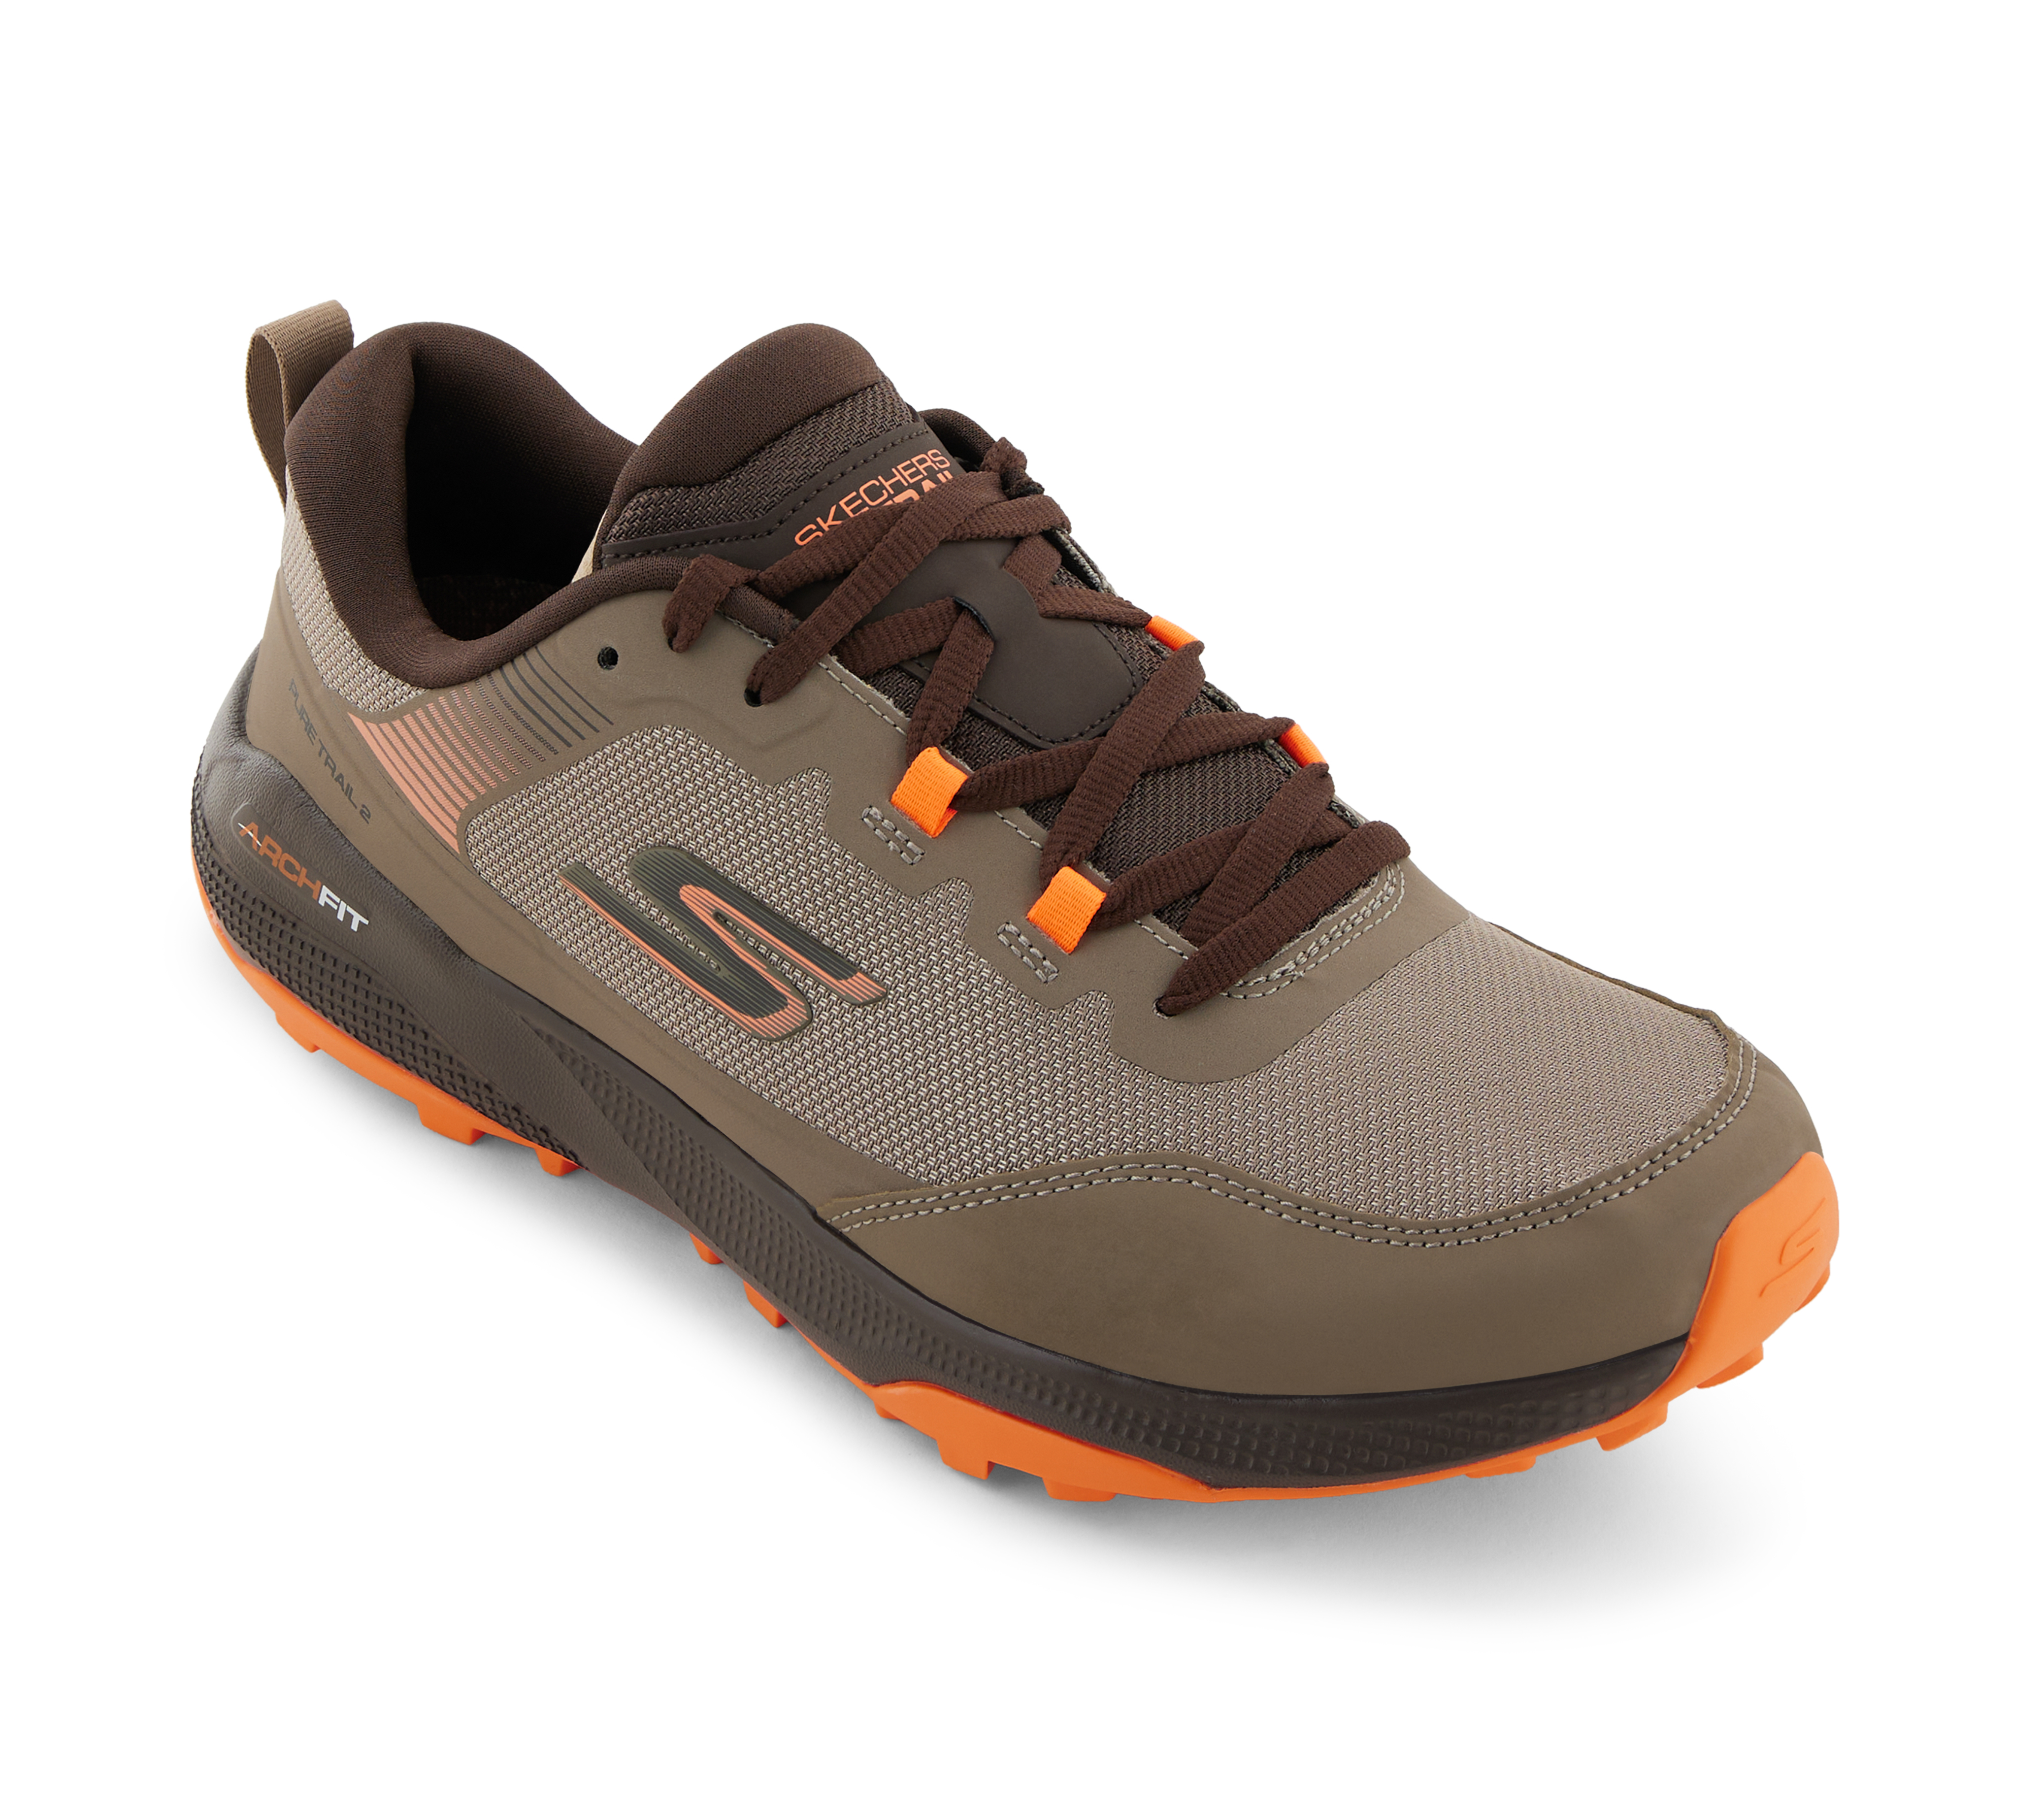 GO RUN PURE TRAIL 2 - VALLEY, BROWN/ORANGE Footwear Lateral View